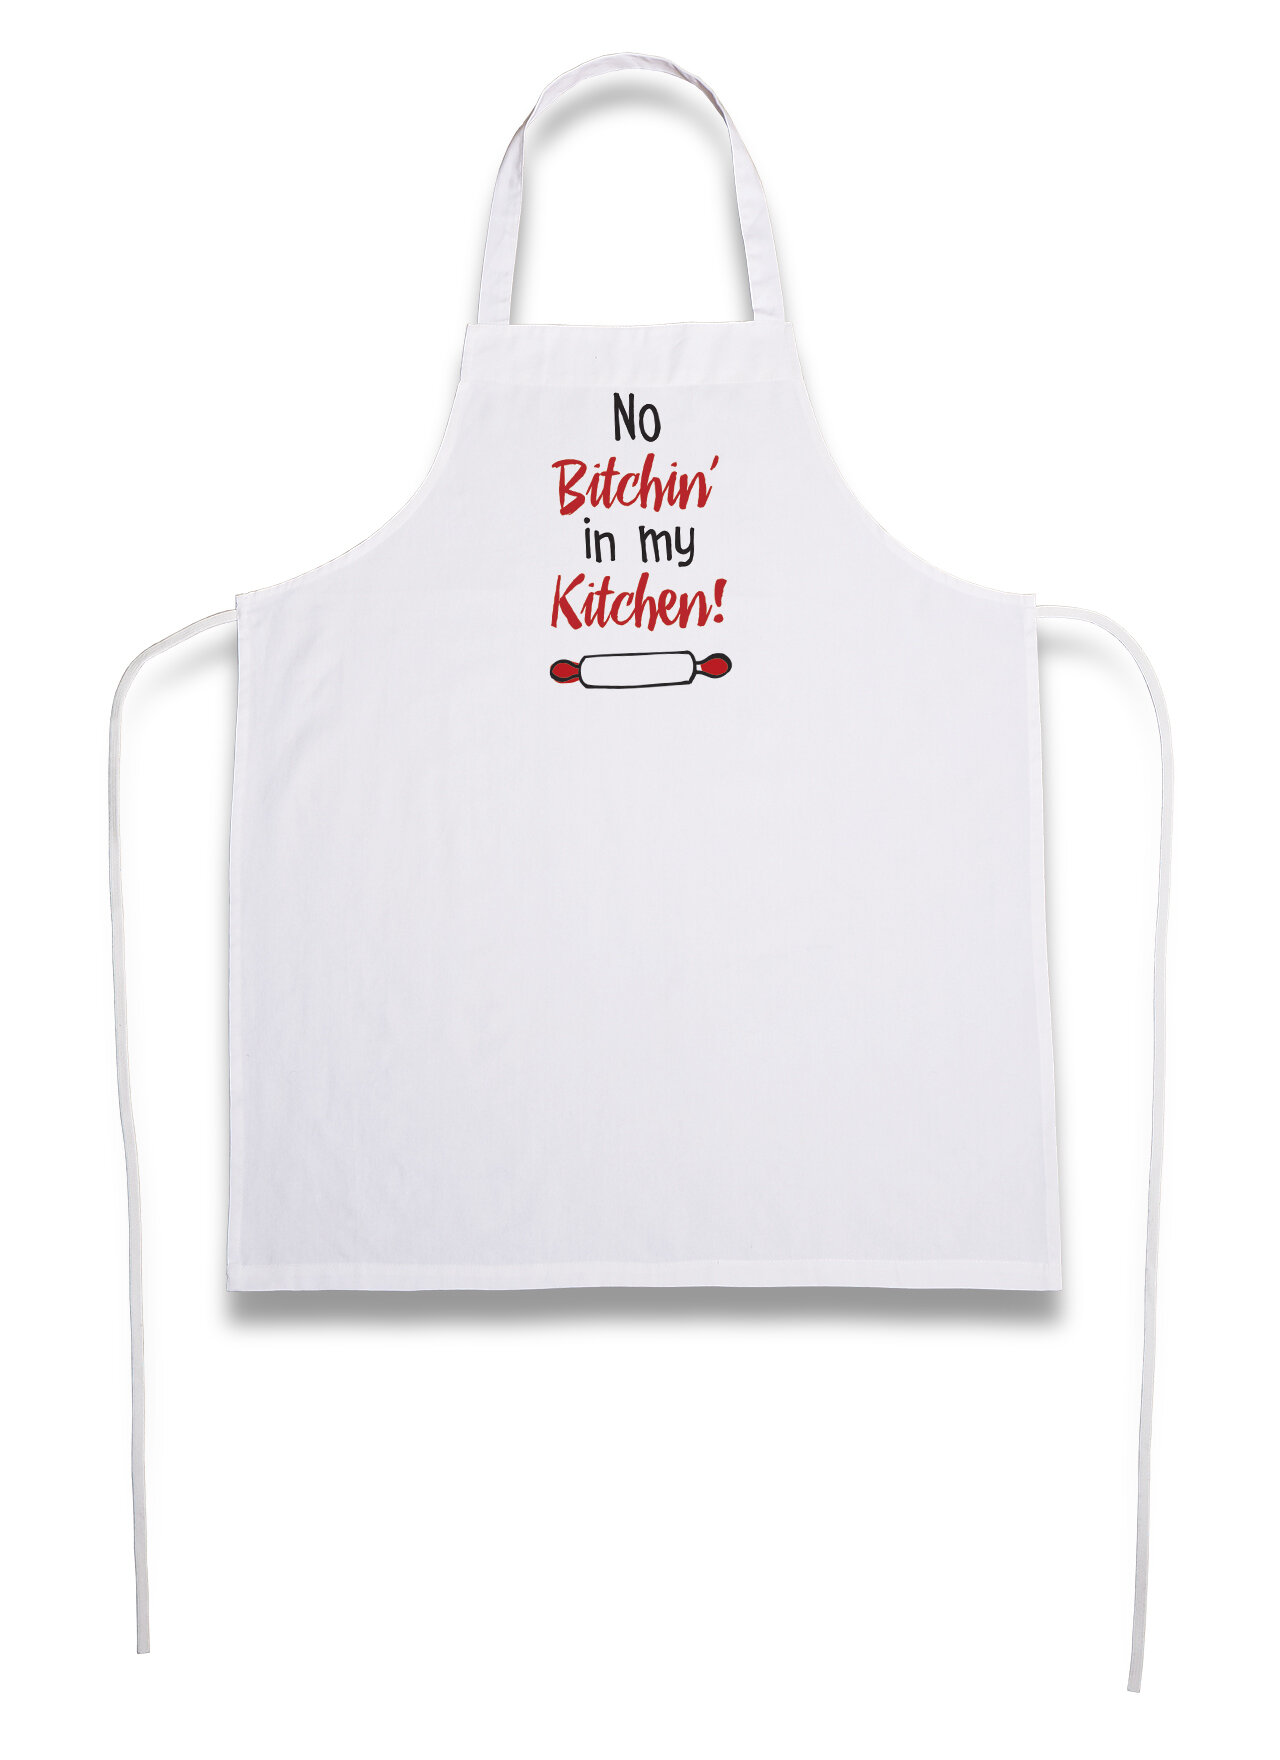 No Bitchin' in my Kitchen, Funny Kitchen Aprons